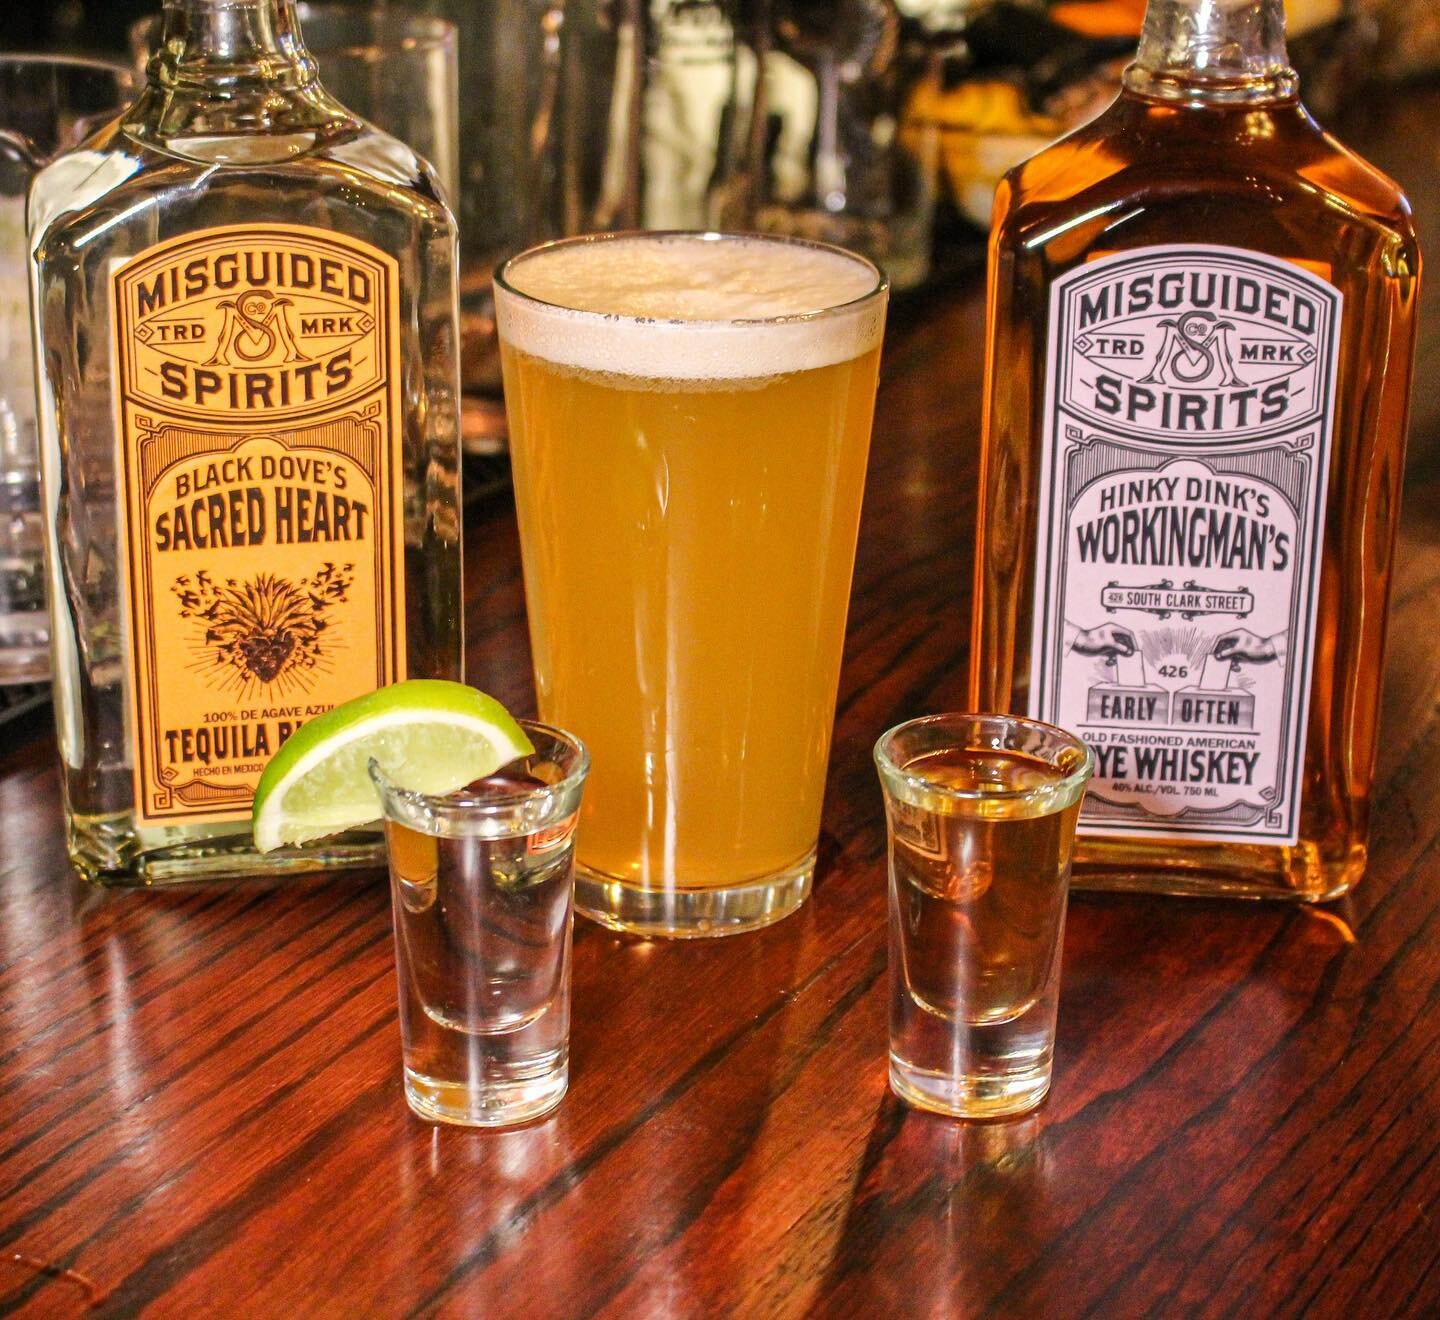 &ldquo;Make it four boilermakers!&rdquo; -Sea Bass. 
Celebrate the weekend with a nice cold beer and a shot of @drinkmisguided whiskey or tequila. Add a shot of @drinkmisguided to ANY beer (yes ANY beer) for only $4 all day every day! 

.
.
.
.
.
.
.